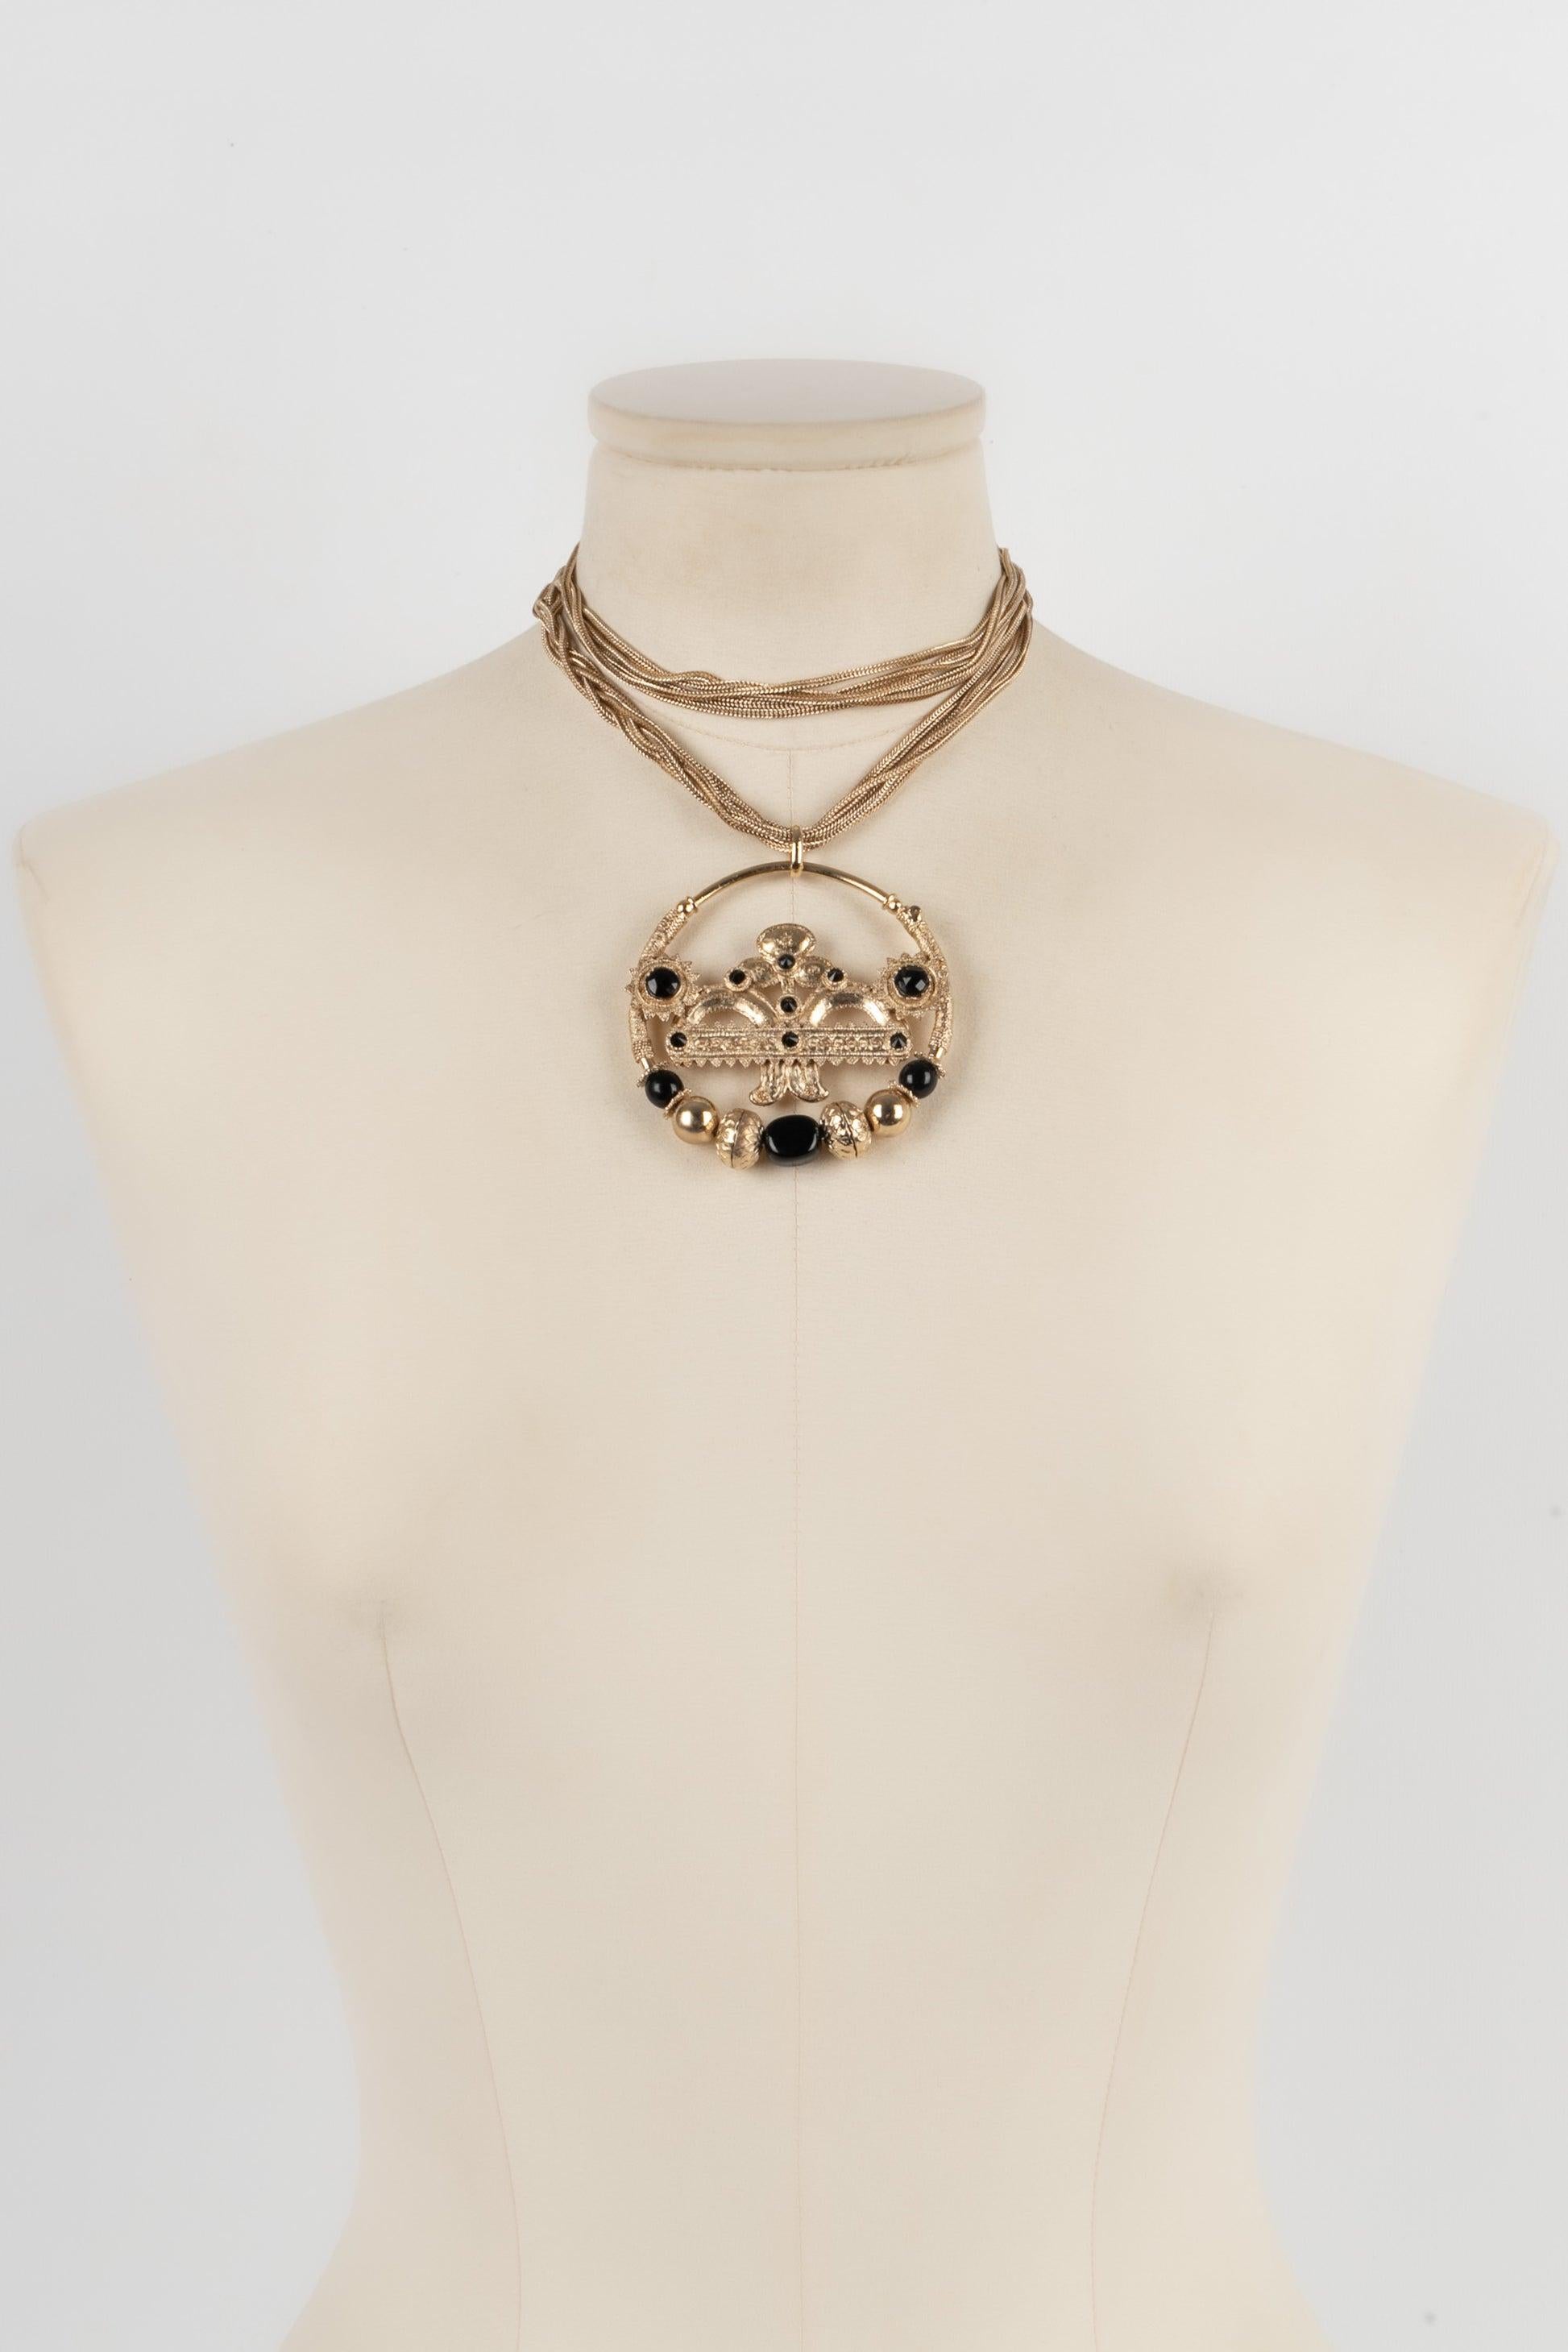 Jean Paul Gaultier Champagne Metal Necklace For Sale 3